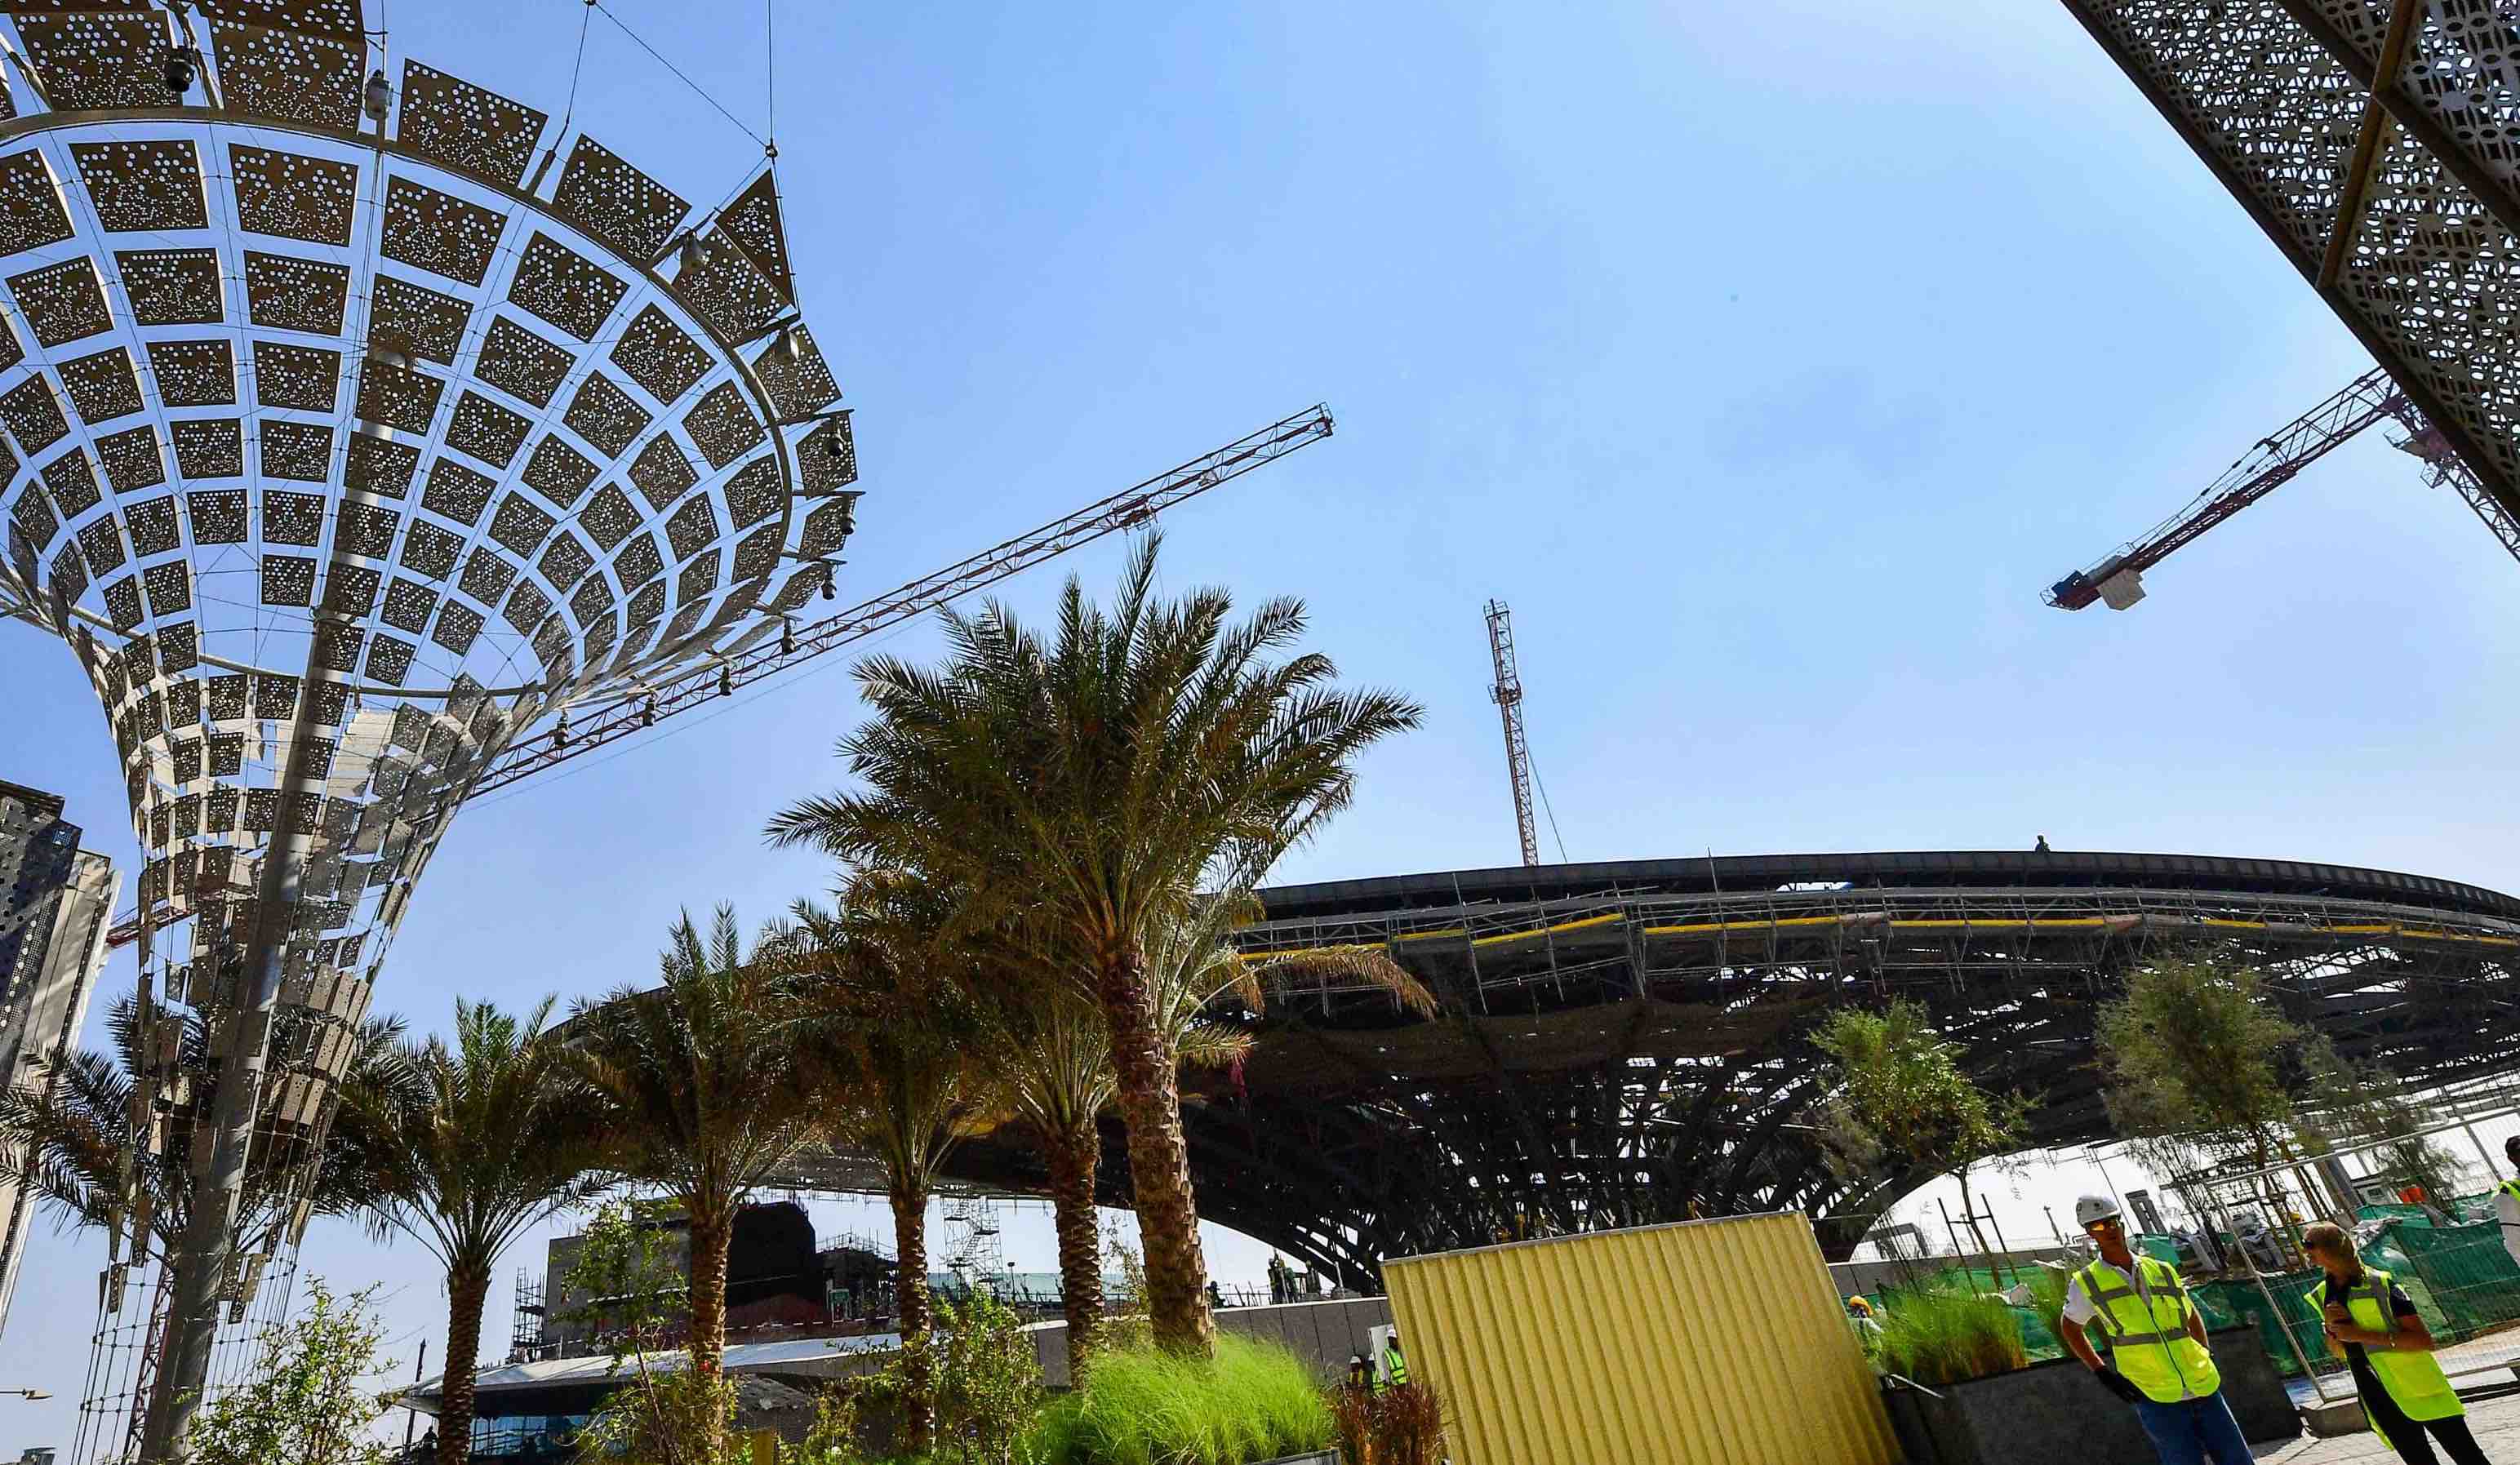 Prime Minister Benjamin Netanyahu has described the Israeli expo pavilion as part of "the continued progress of normalisation with the Arab states"